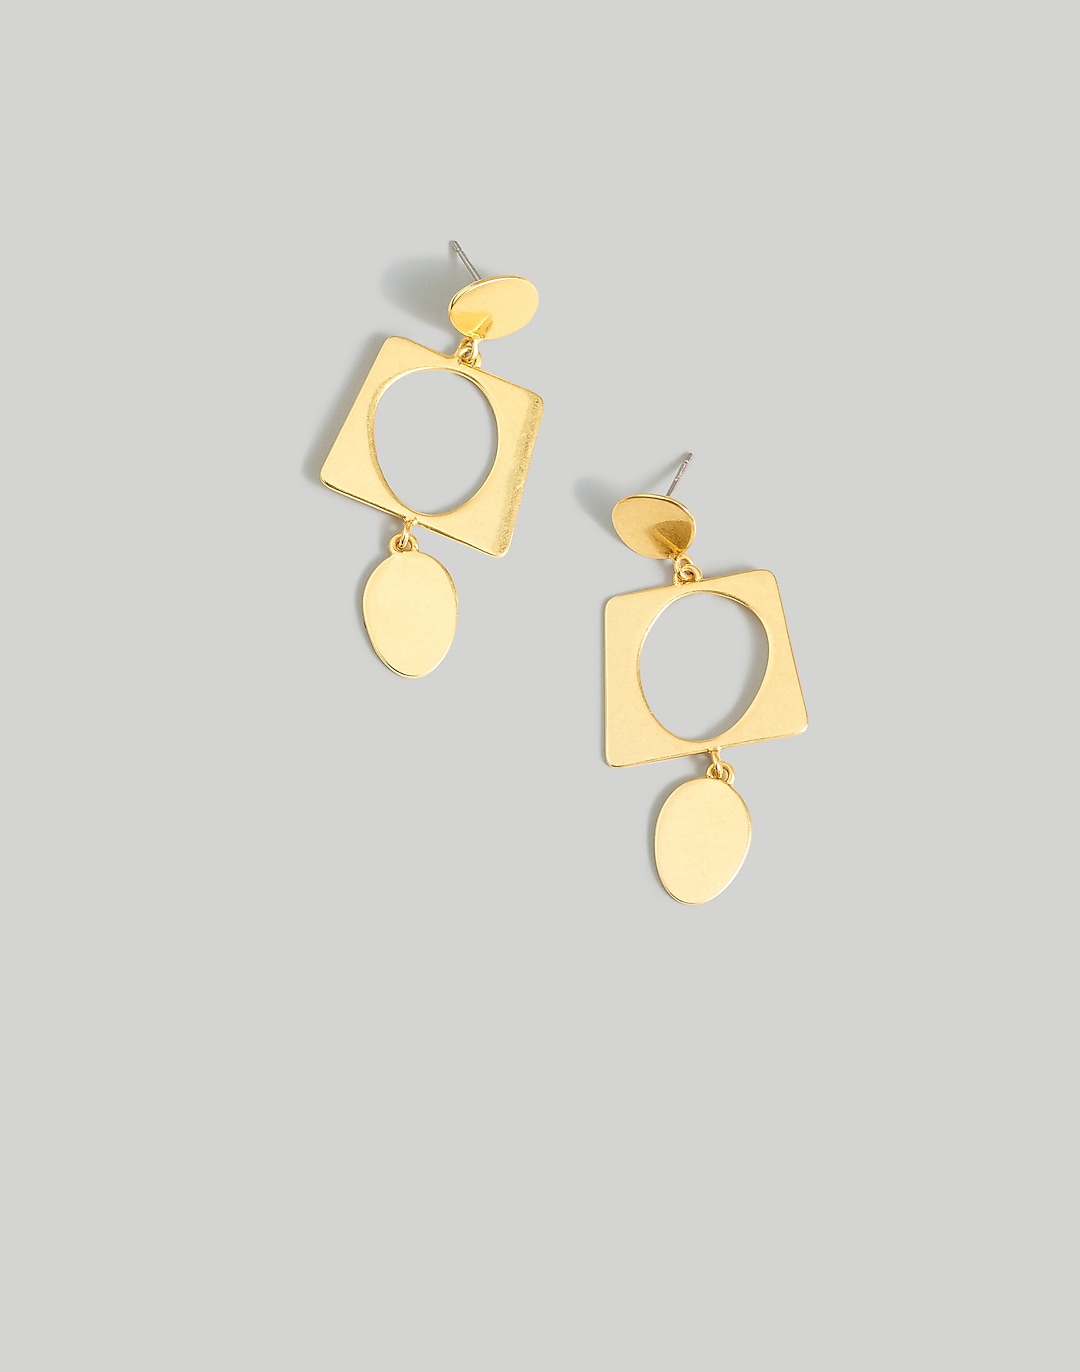 Cutout Statement Earrings | Madewell